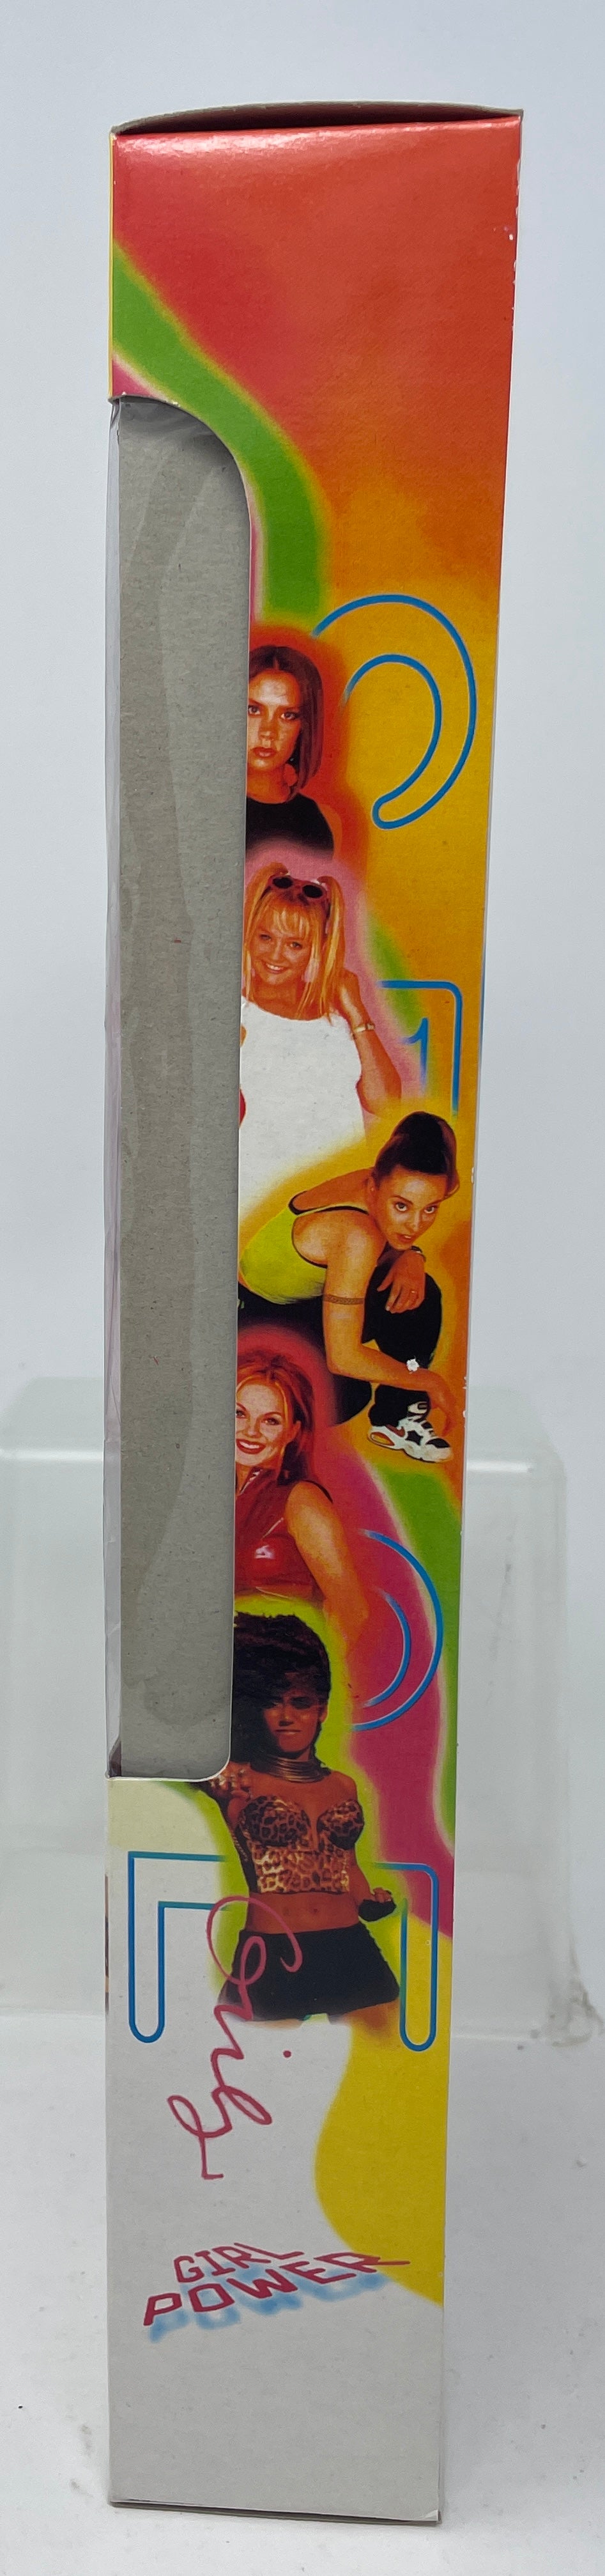 SPICE GIRLS - BABY SPICE - RARE BOOTLEG OF GALOOB 1997